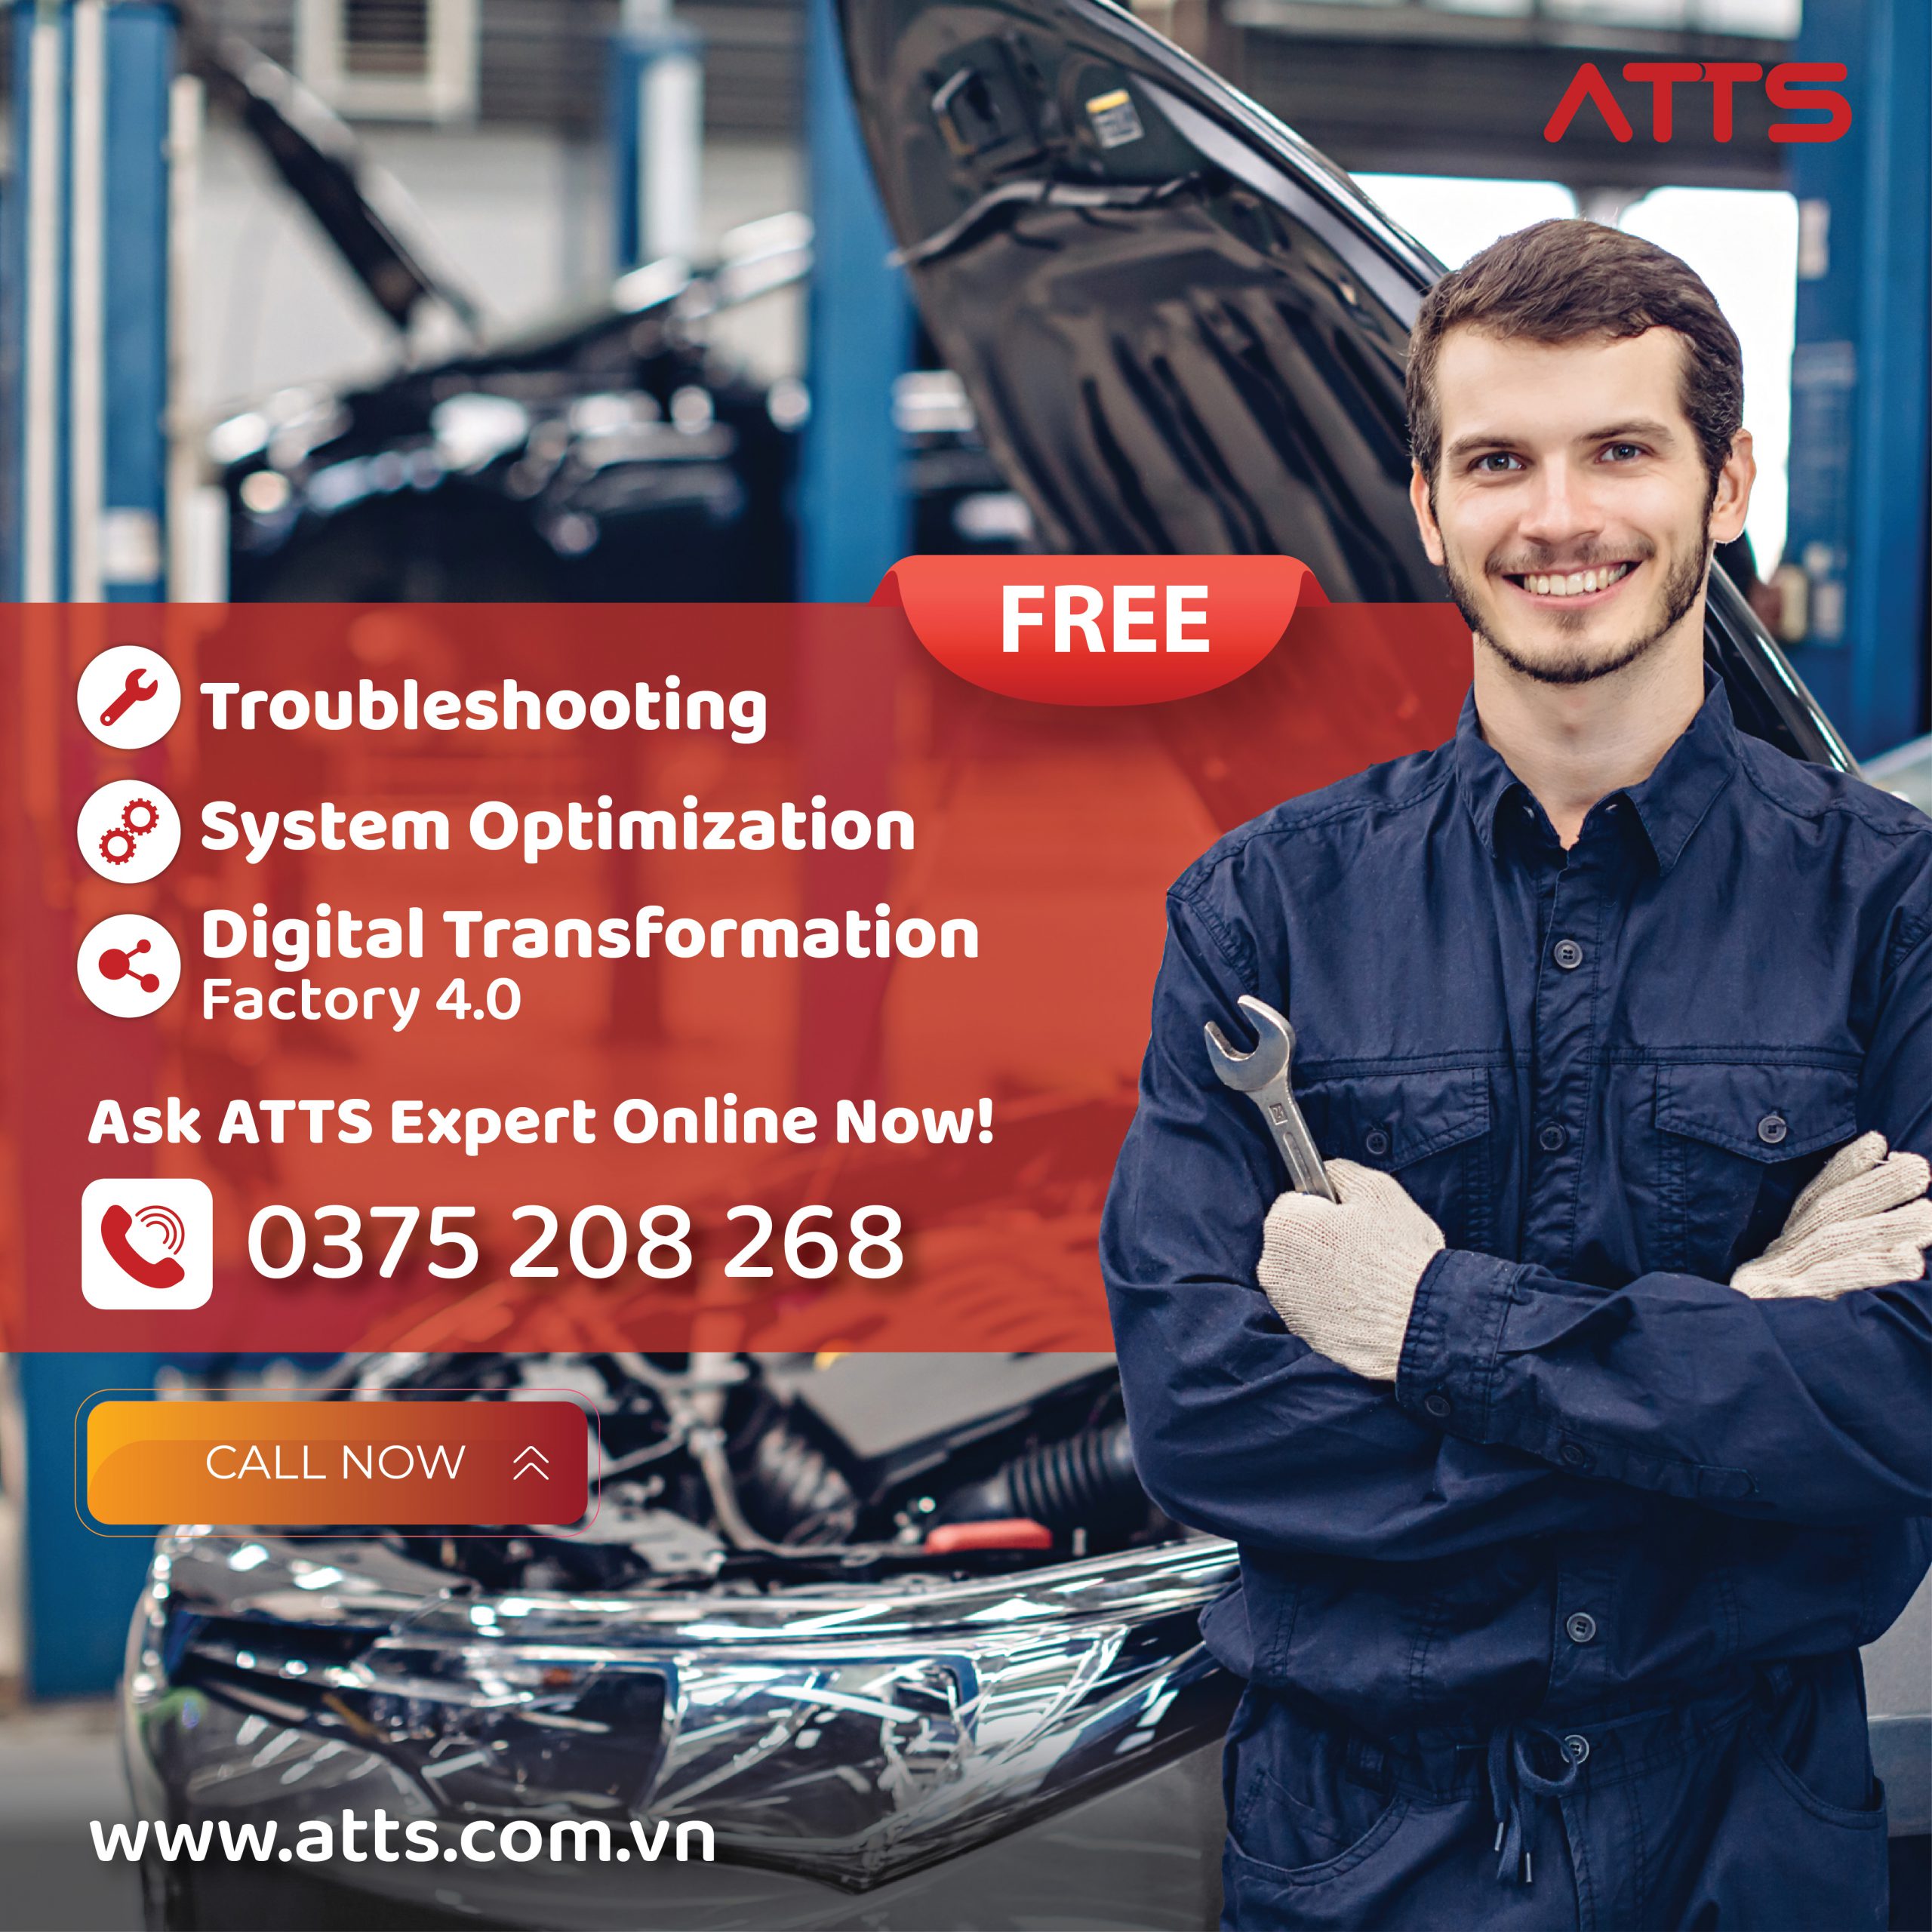 Contact us now to get a FREE consultation from ATTS experts